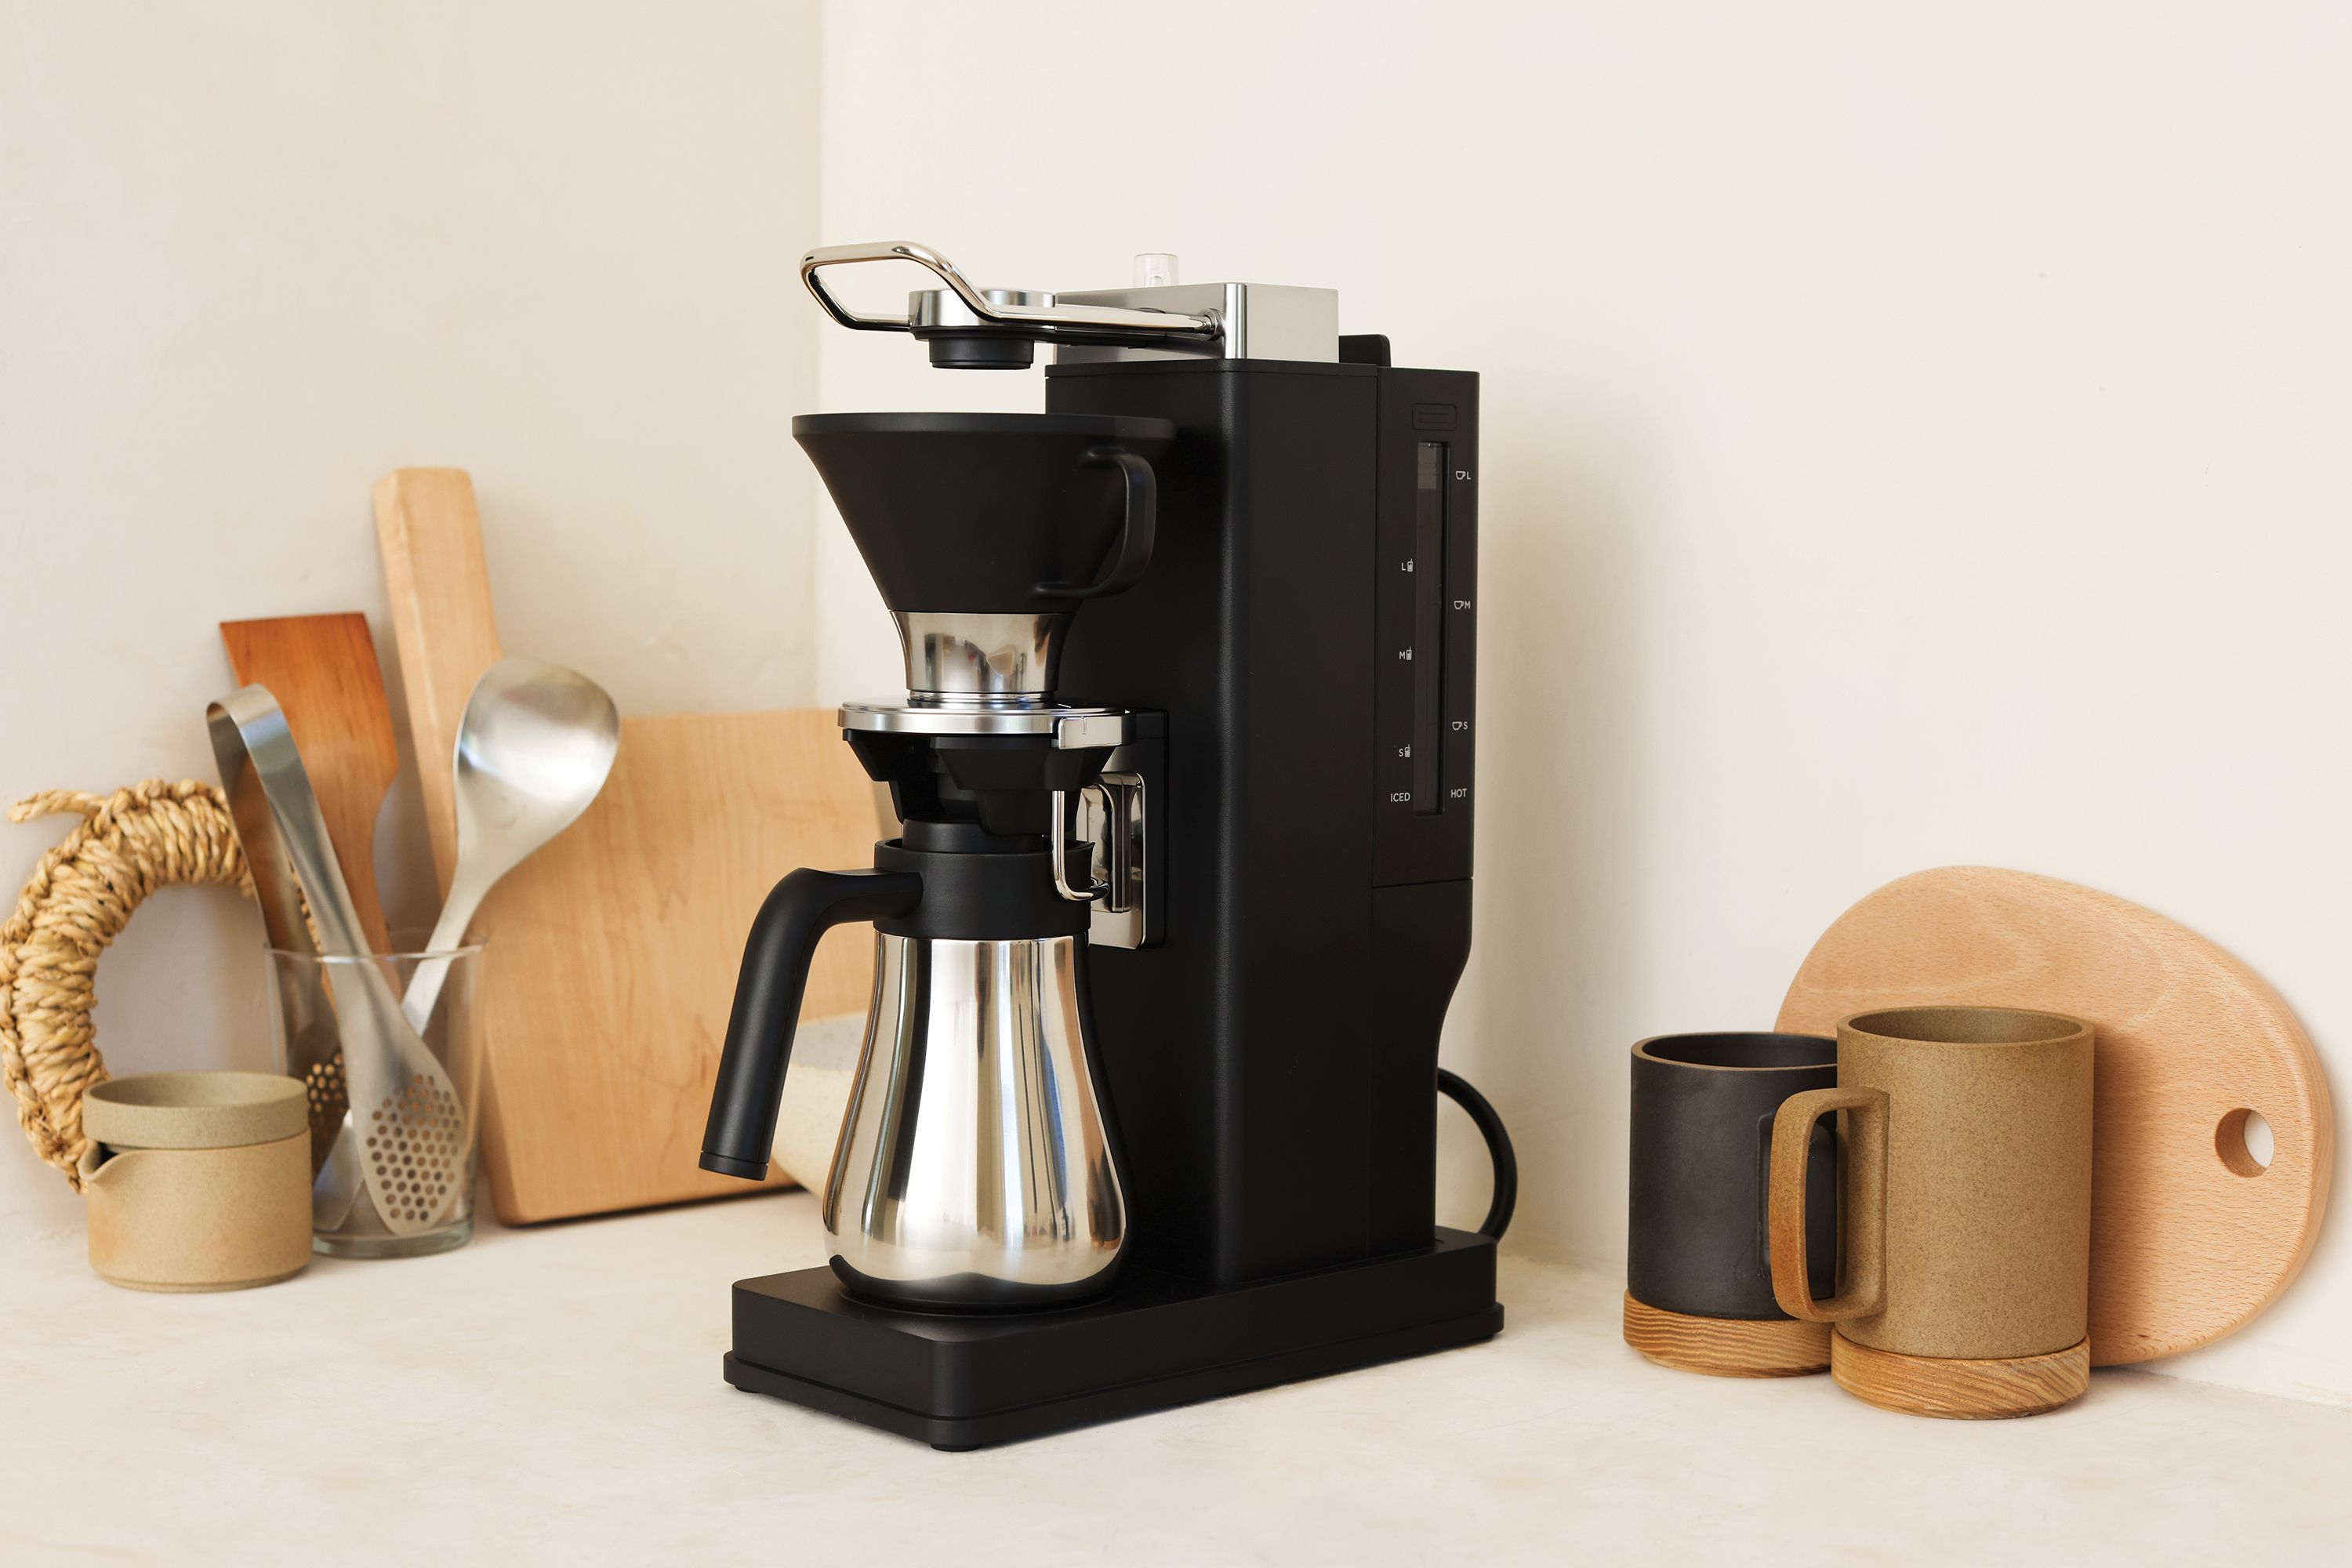 Balmuda The Brew Review: Is This Unique Coffee Maker Worth $700?